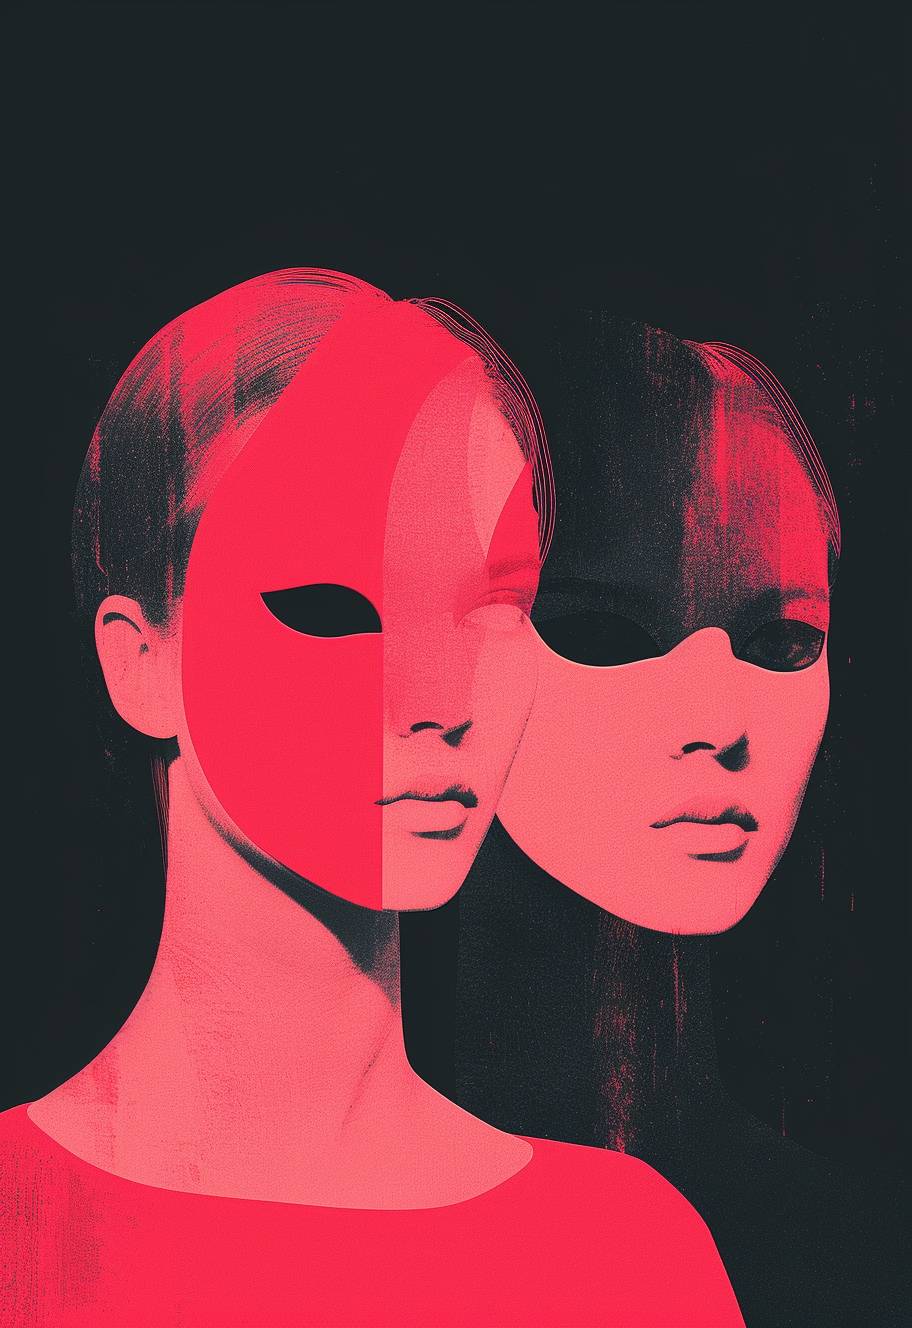 Minimalist retro illustration in the style of surreal two women with masks on their faces, pink and red color palette against a black background with dark contrast, minimalism featuring simple shapes in a surreal style.